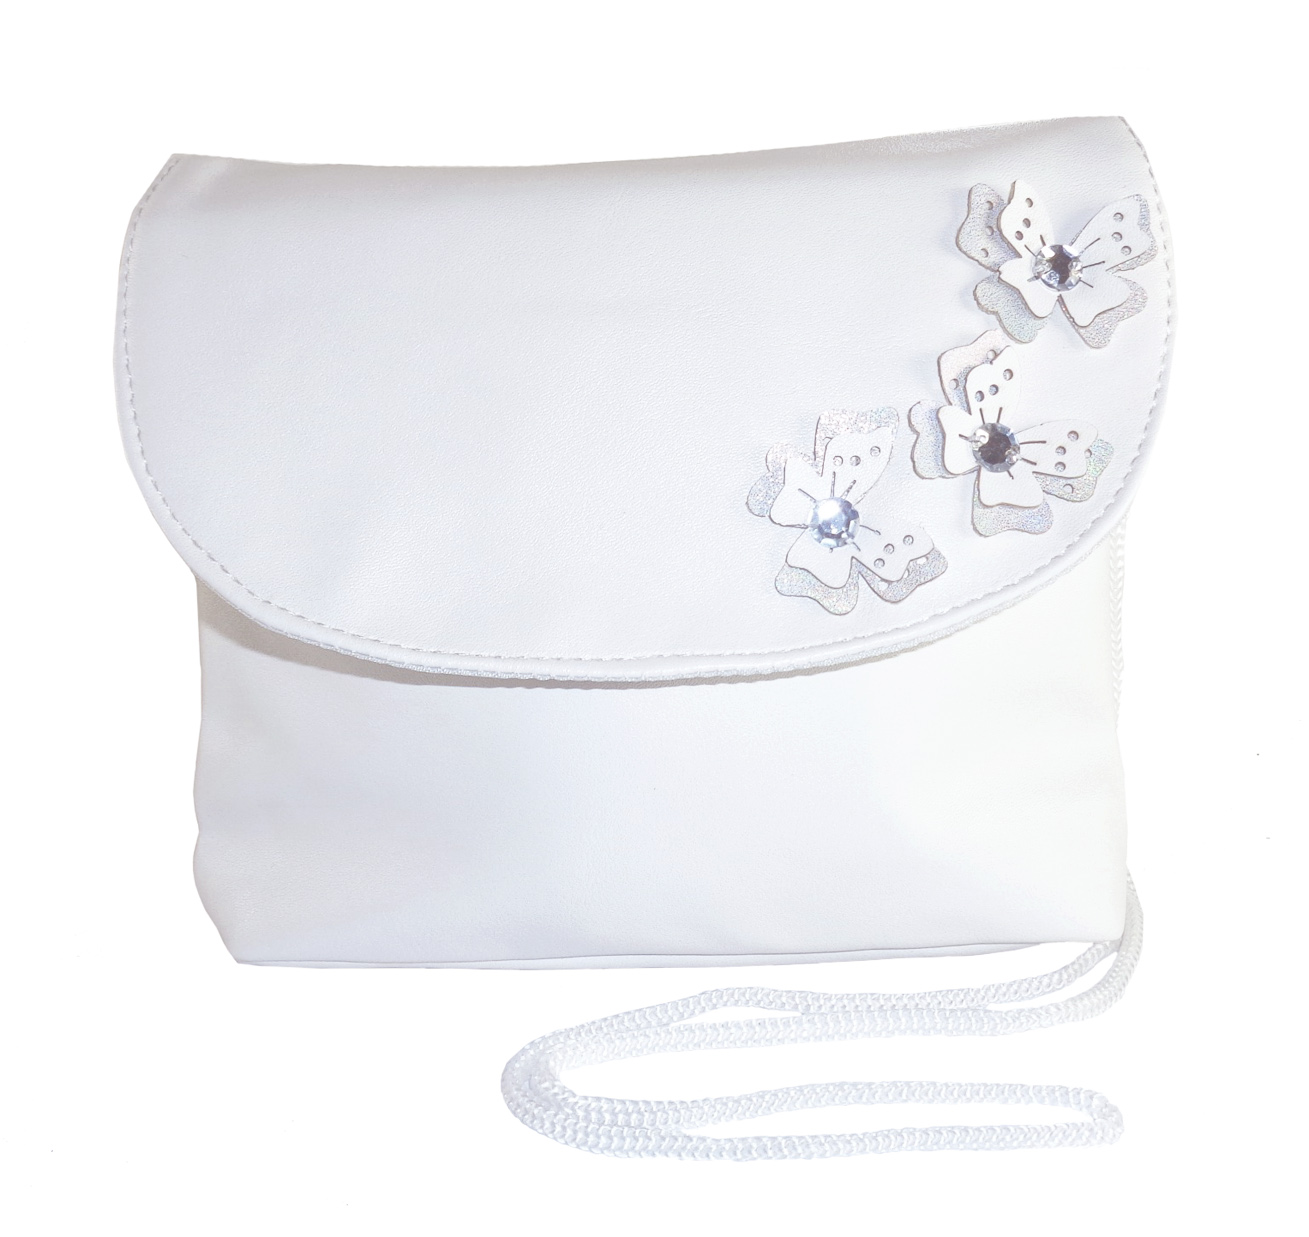 Childrens white handbag with butterfly tirms-6536